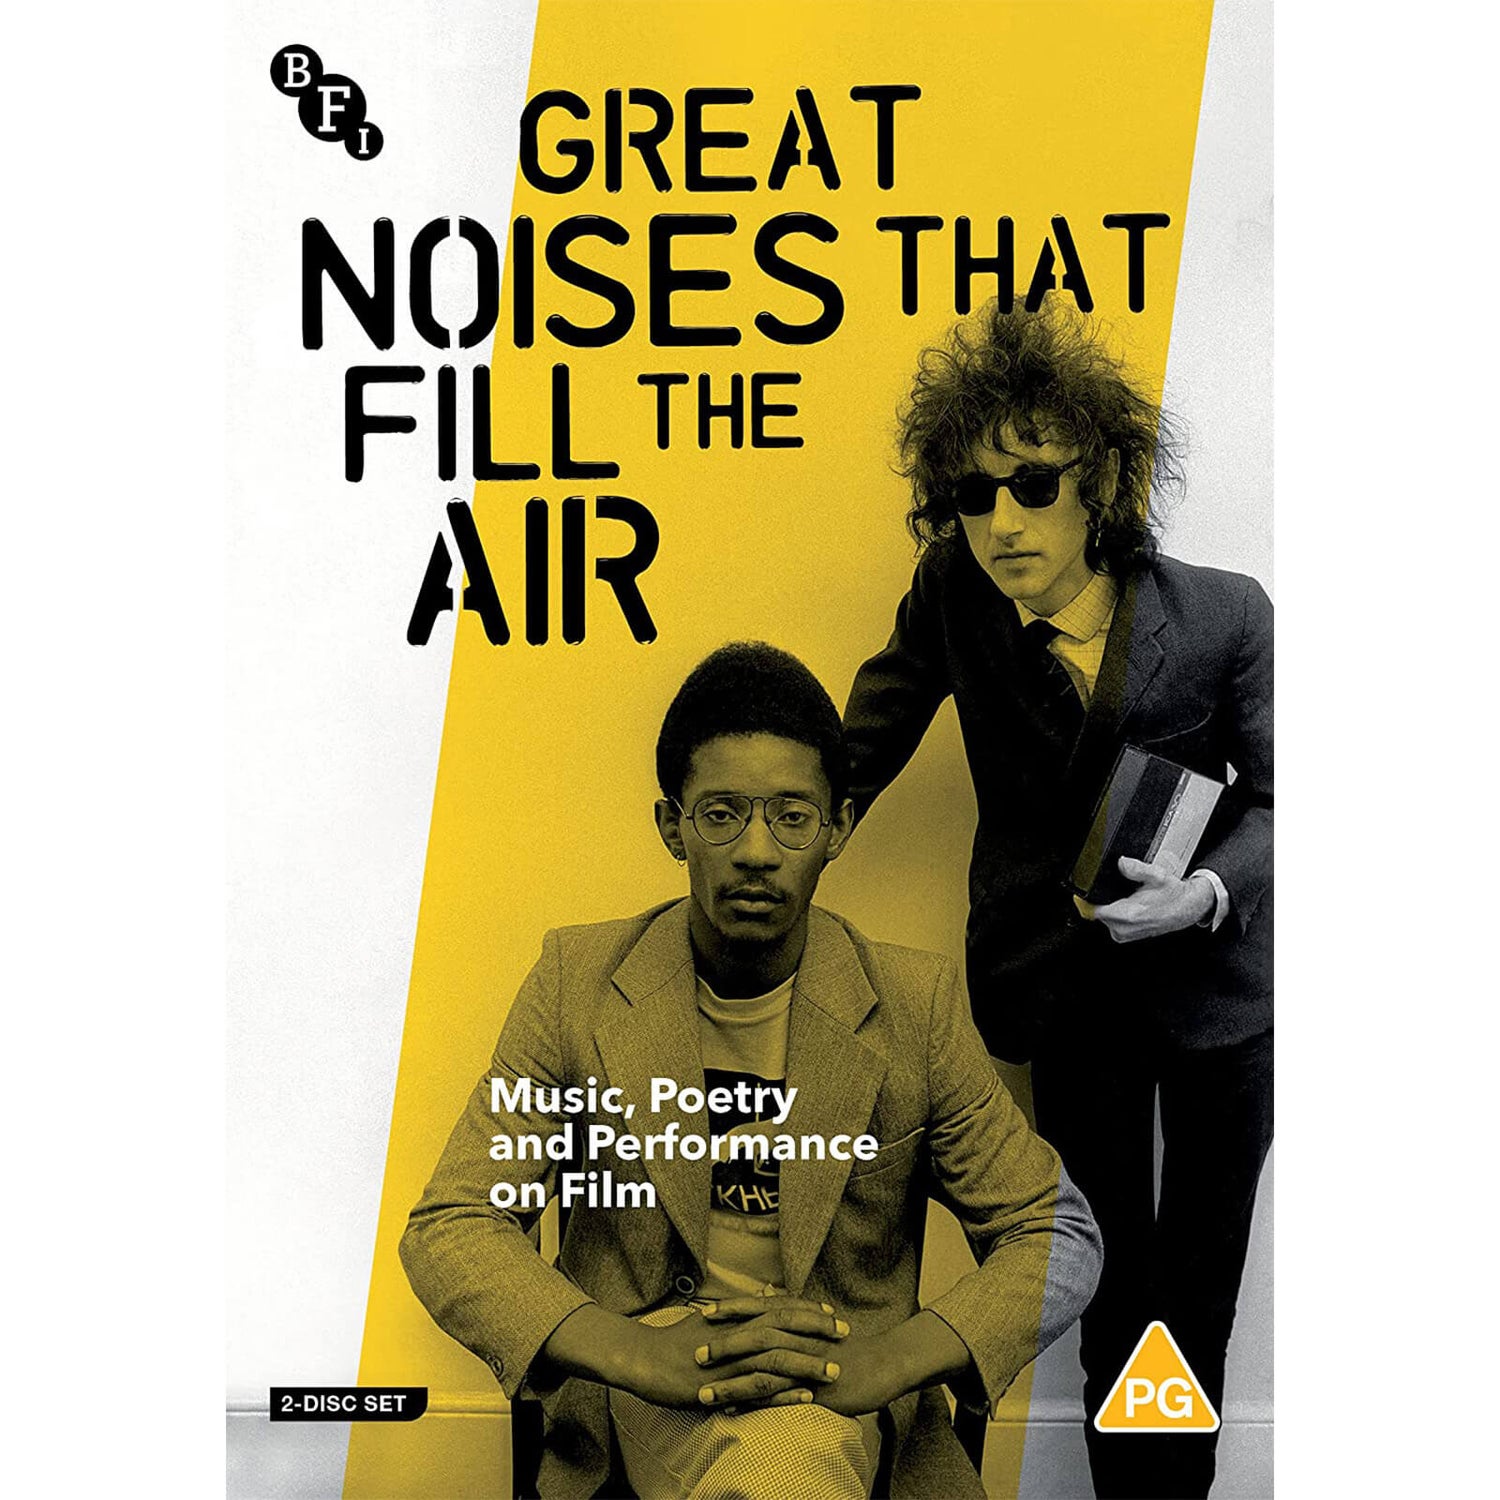 Great Noises That Fill The Air